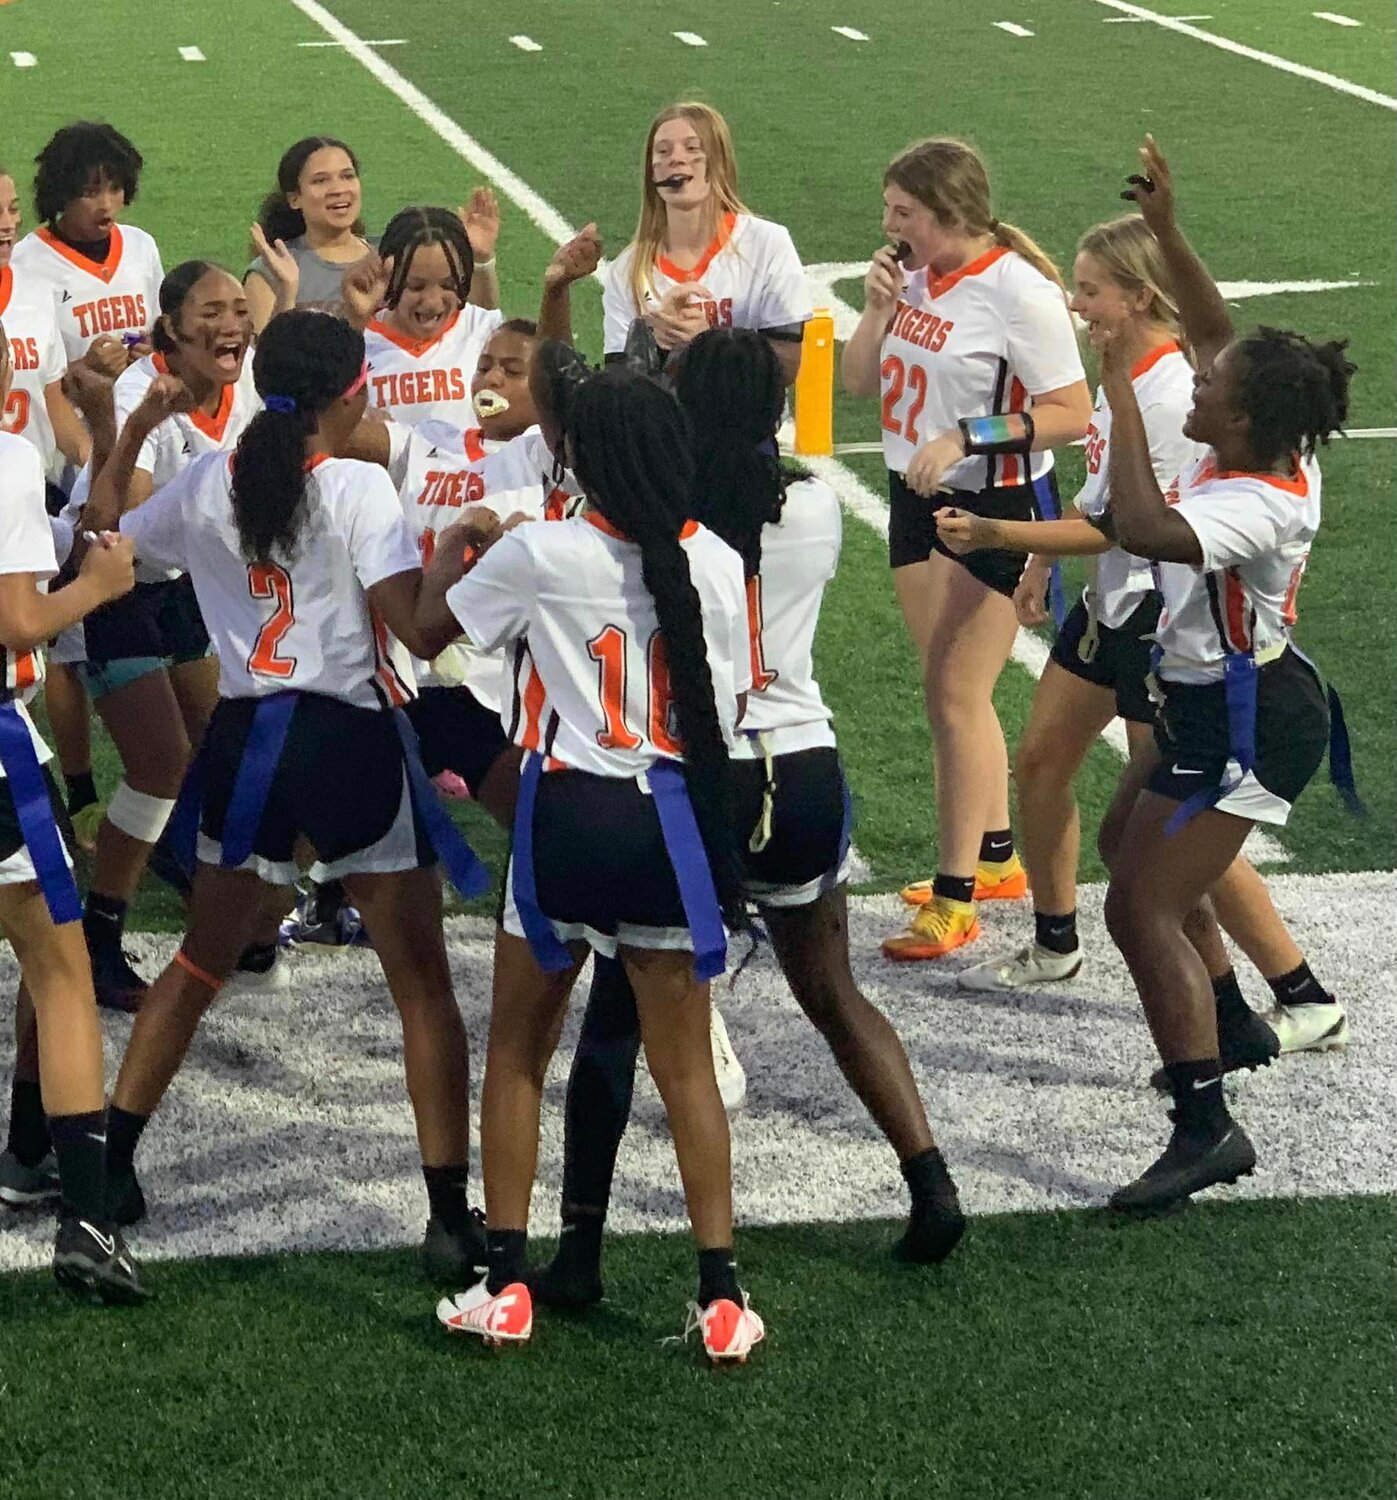 The Baldwin County Tigers celebrate on the sideline during their inaugural flag football game against the LeFlore Rattlers in Mobile on Tuesday, Sept. 19. Baldwin County is playing in its first flag football season after the AHSAA launched the sport with a pilot season this year before aligning it for championship play in 2024.